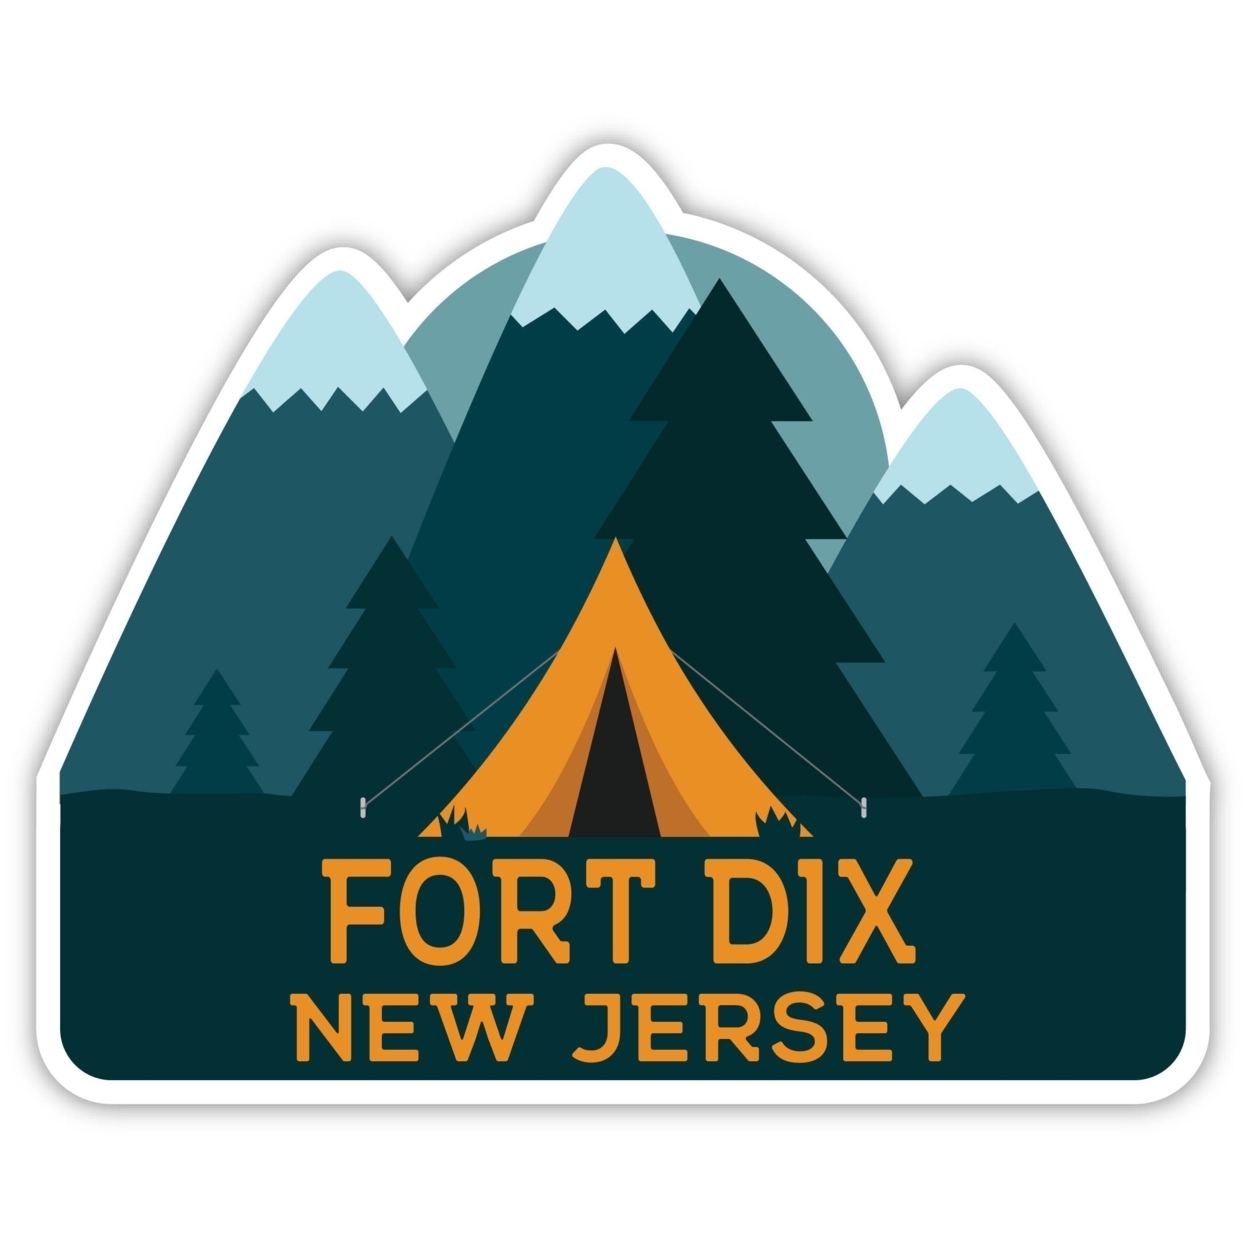 Fort Dix New Jersey Souvenir Decorative Stickers (Choose Theme And Size) - 4-Pack, 8-Inch, Tent